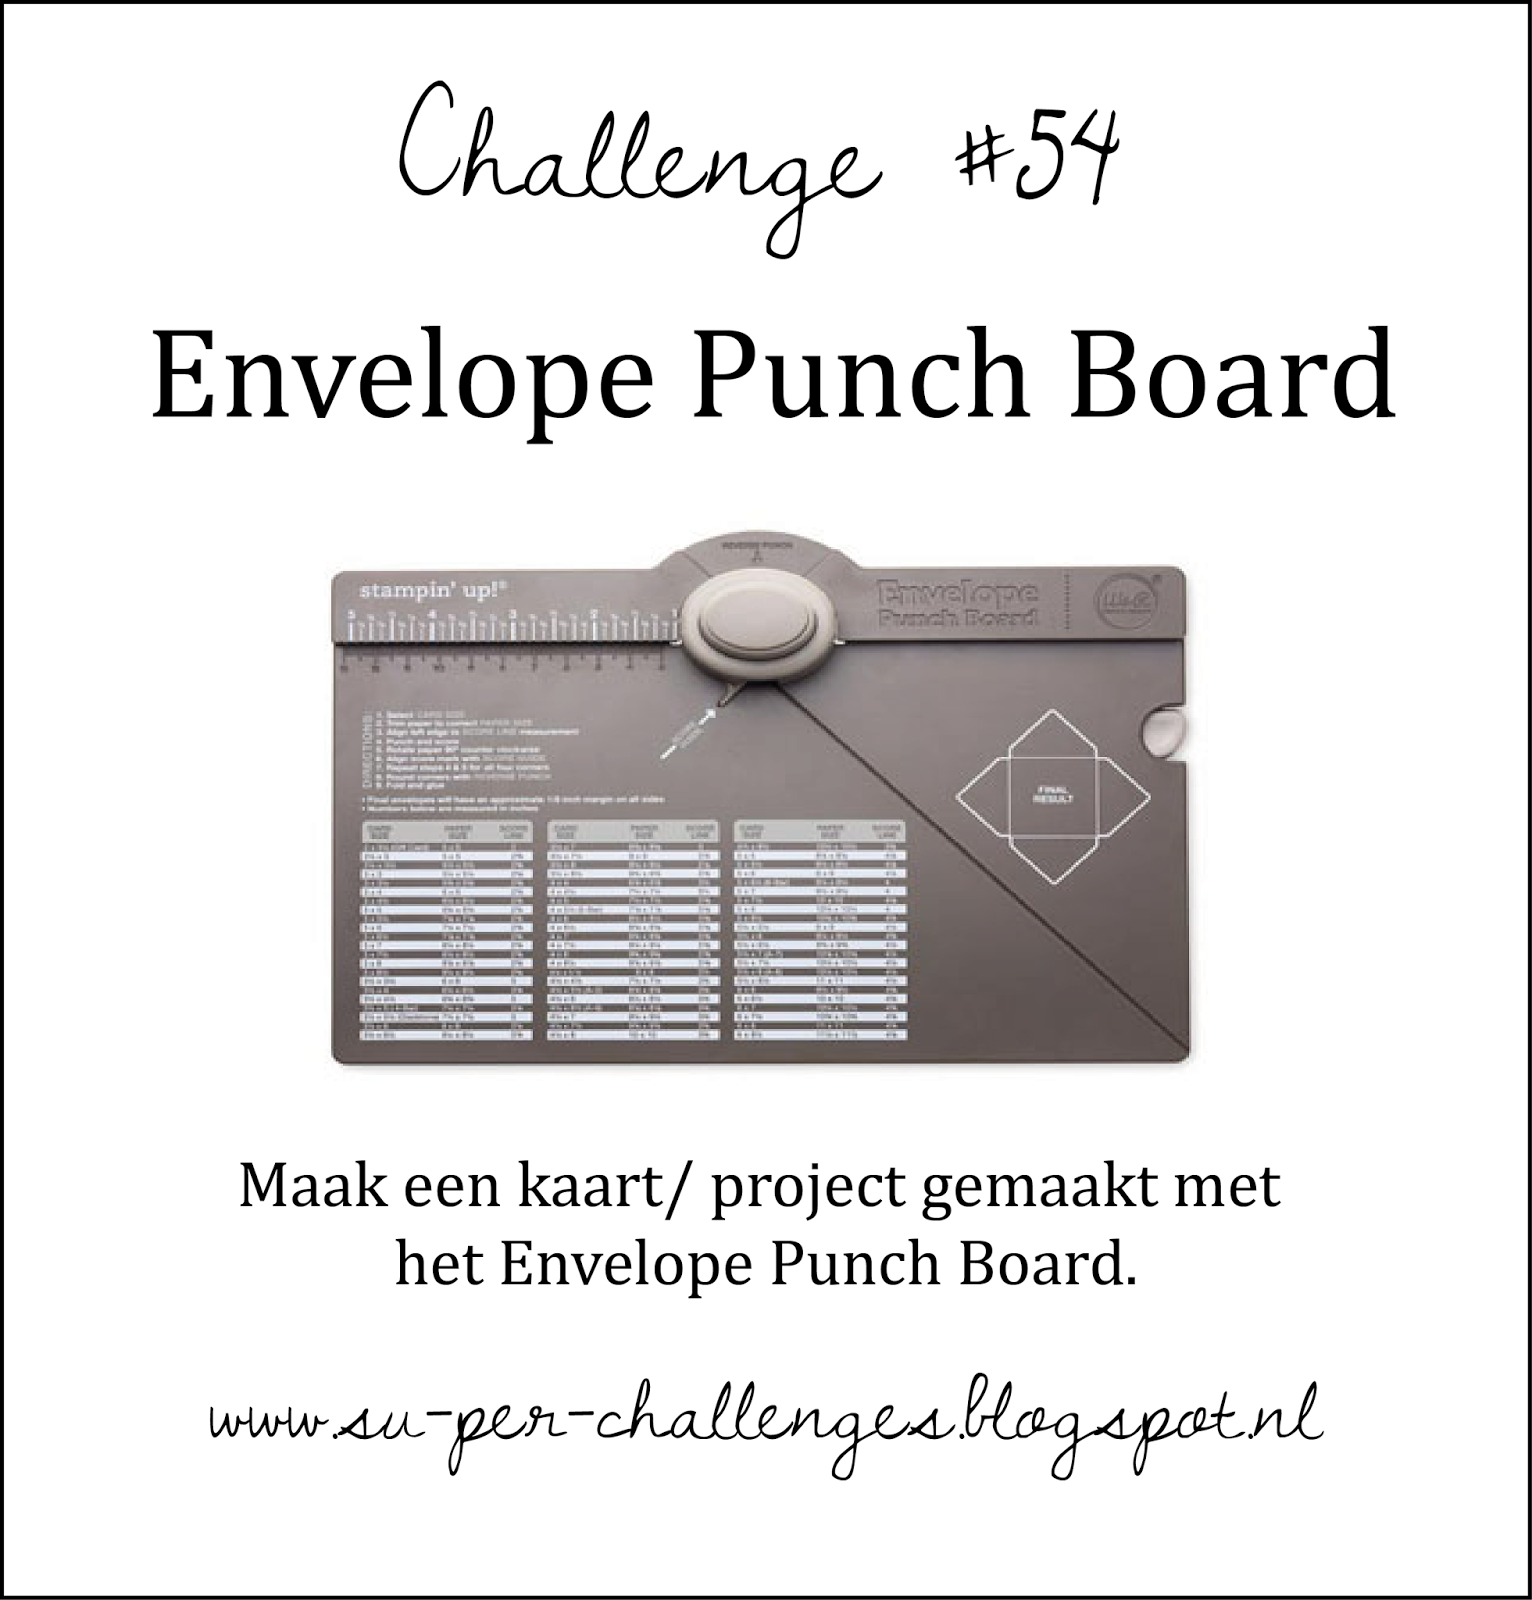 http://su-per-challenges.blogspot.nl/2014/09/challenge-54-thema-envelope-punch-board.html